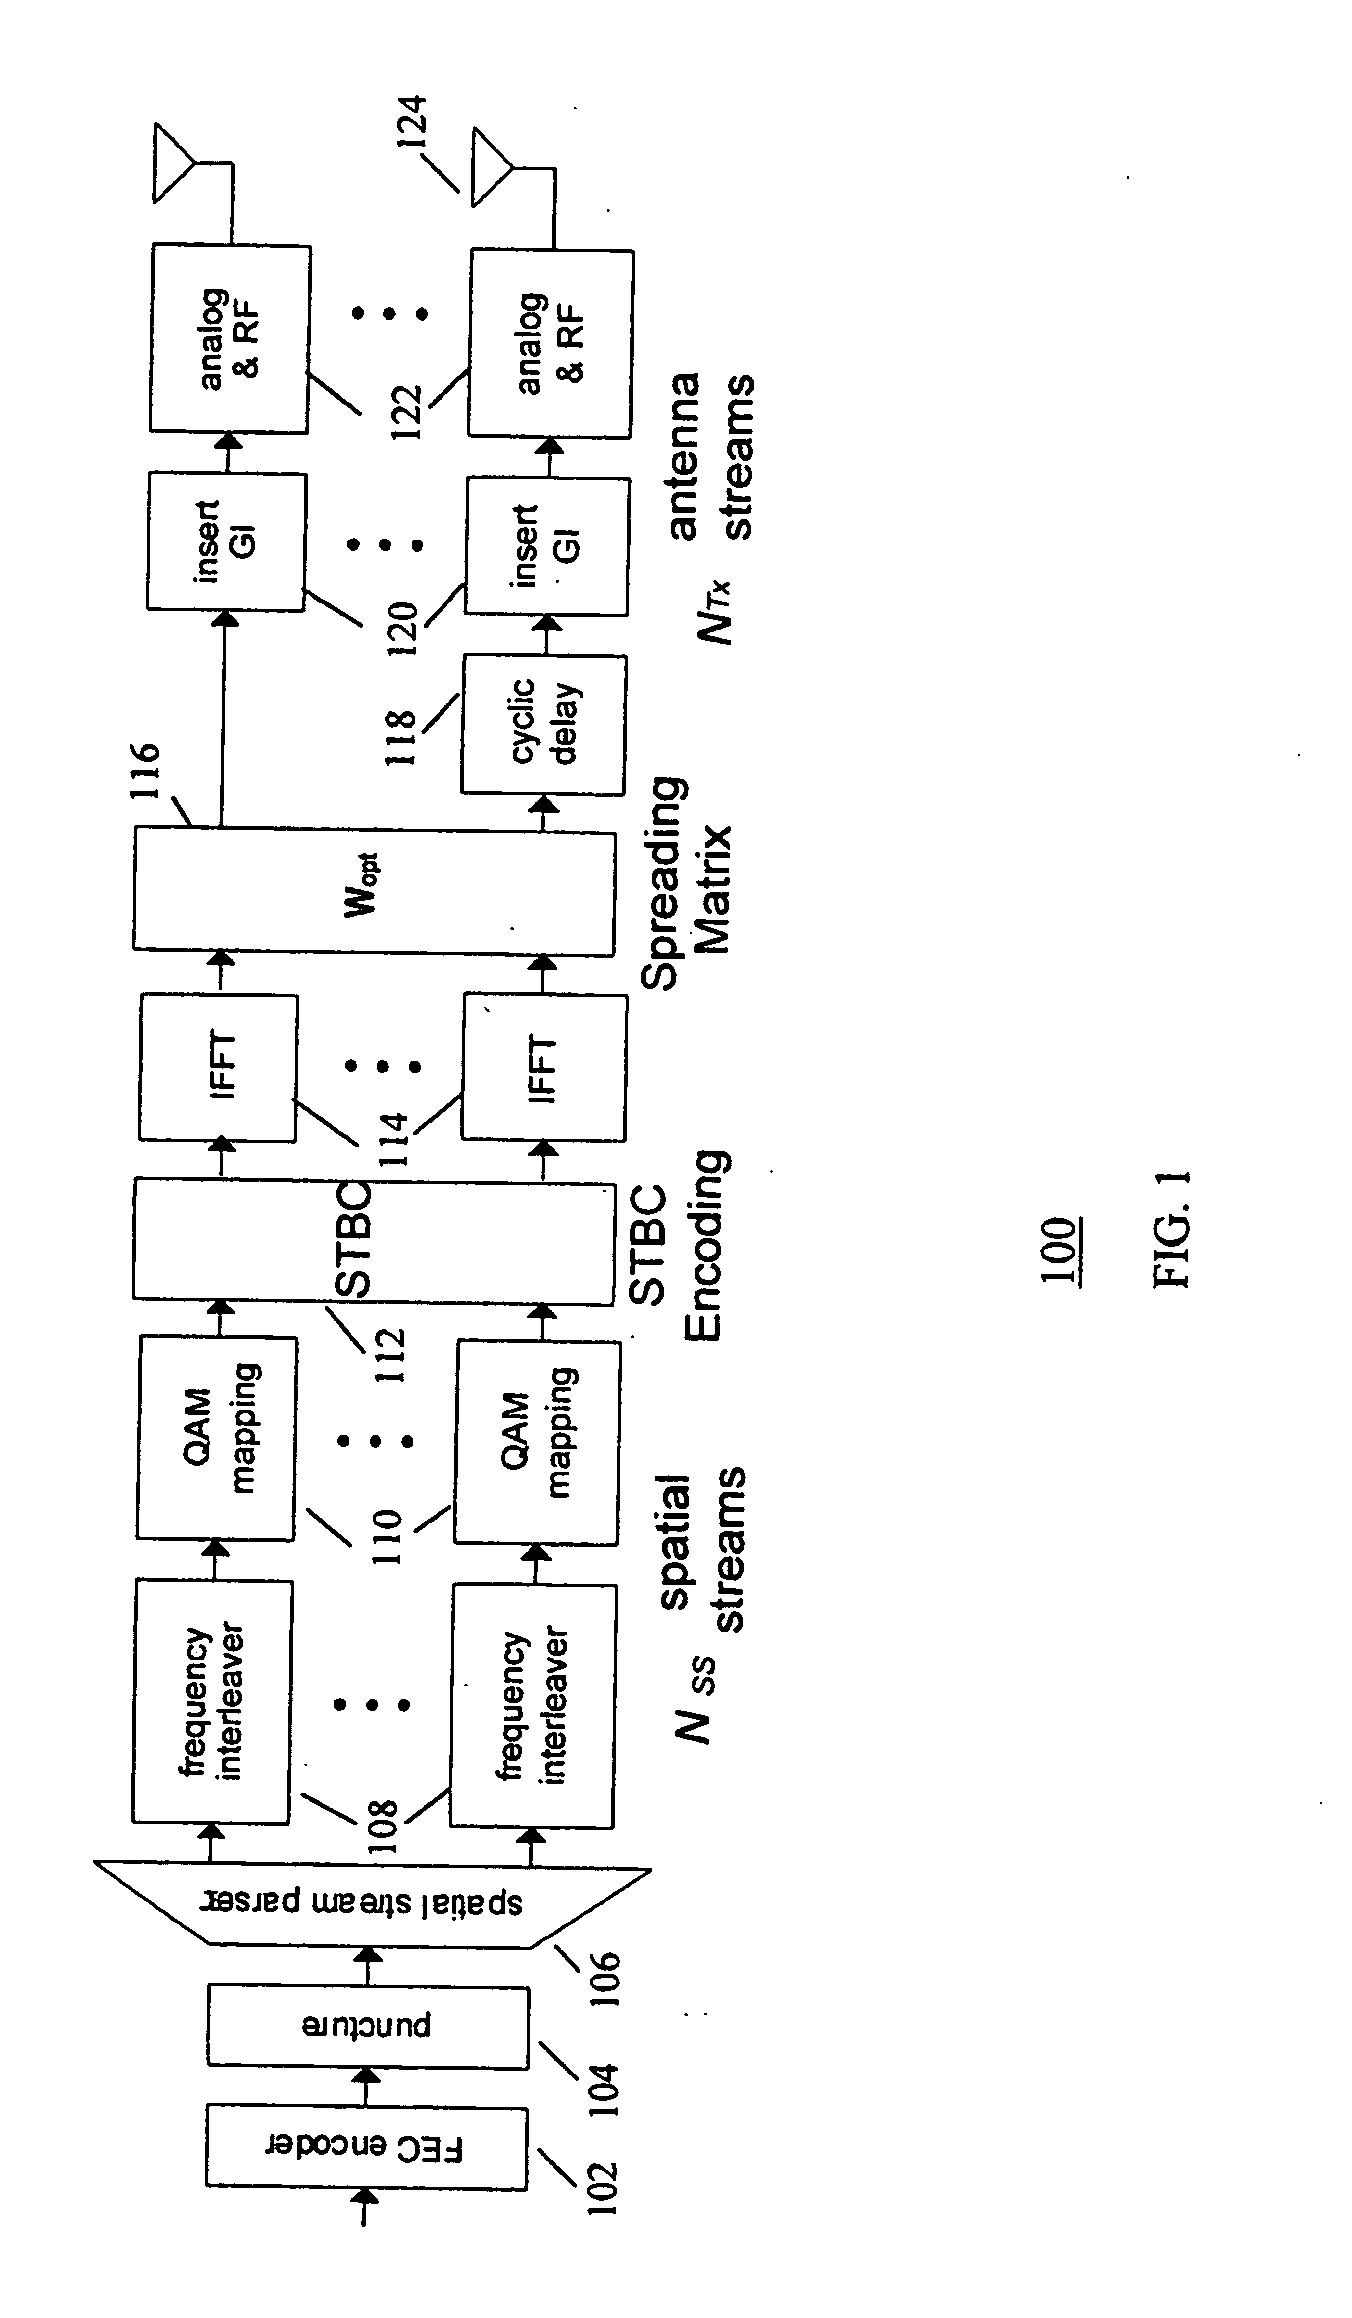 Method and system for computing a spatial spreading matrix for space-time coding in wireless communication systems